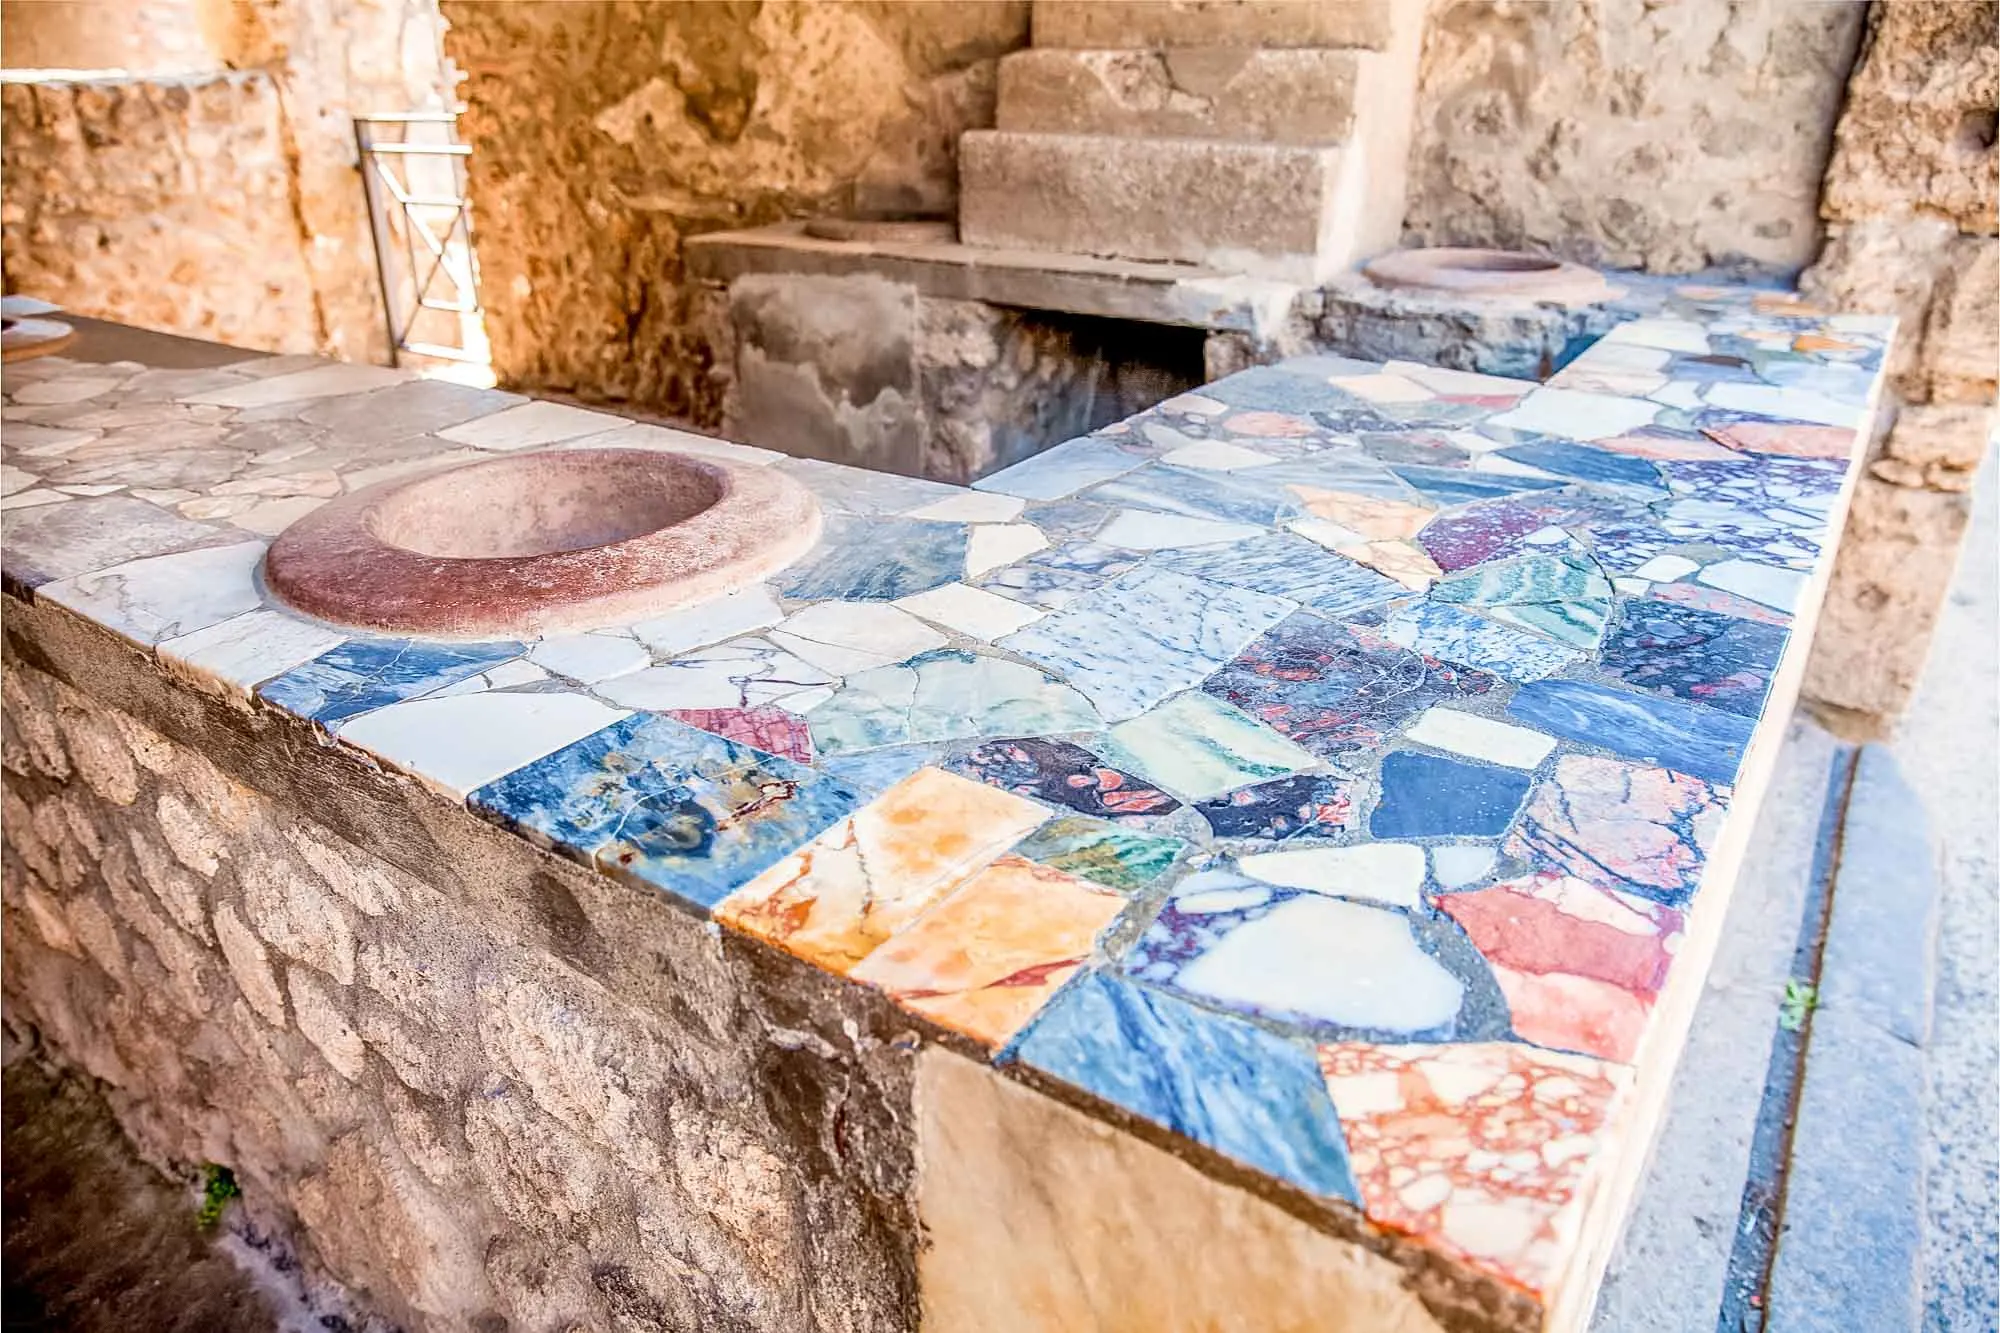 Tilework in the ruins of Pompeii